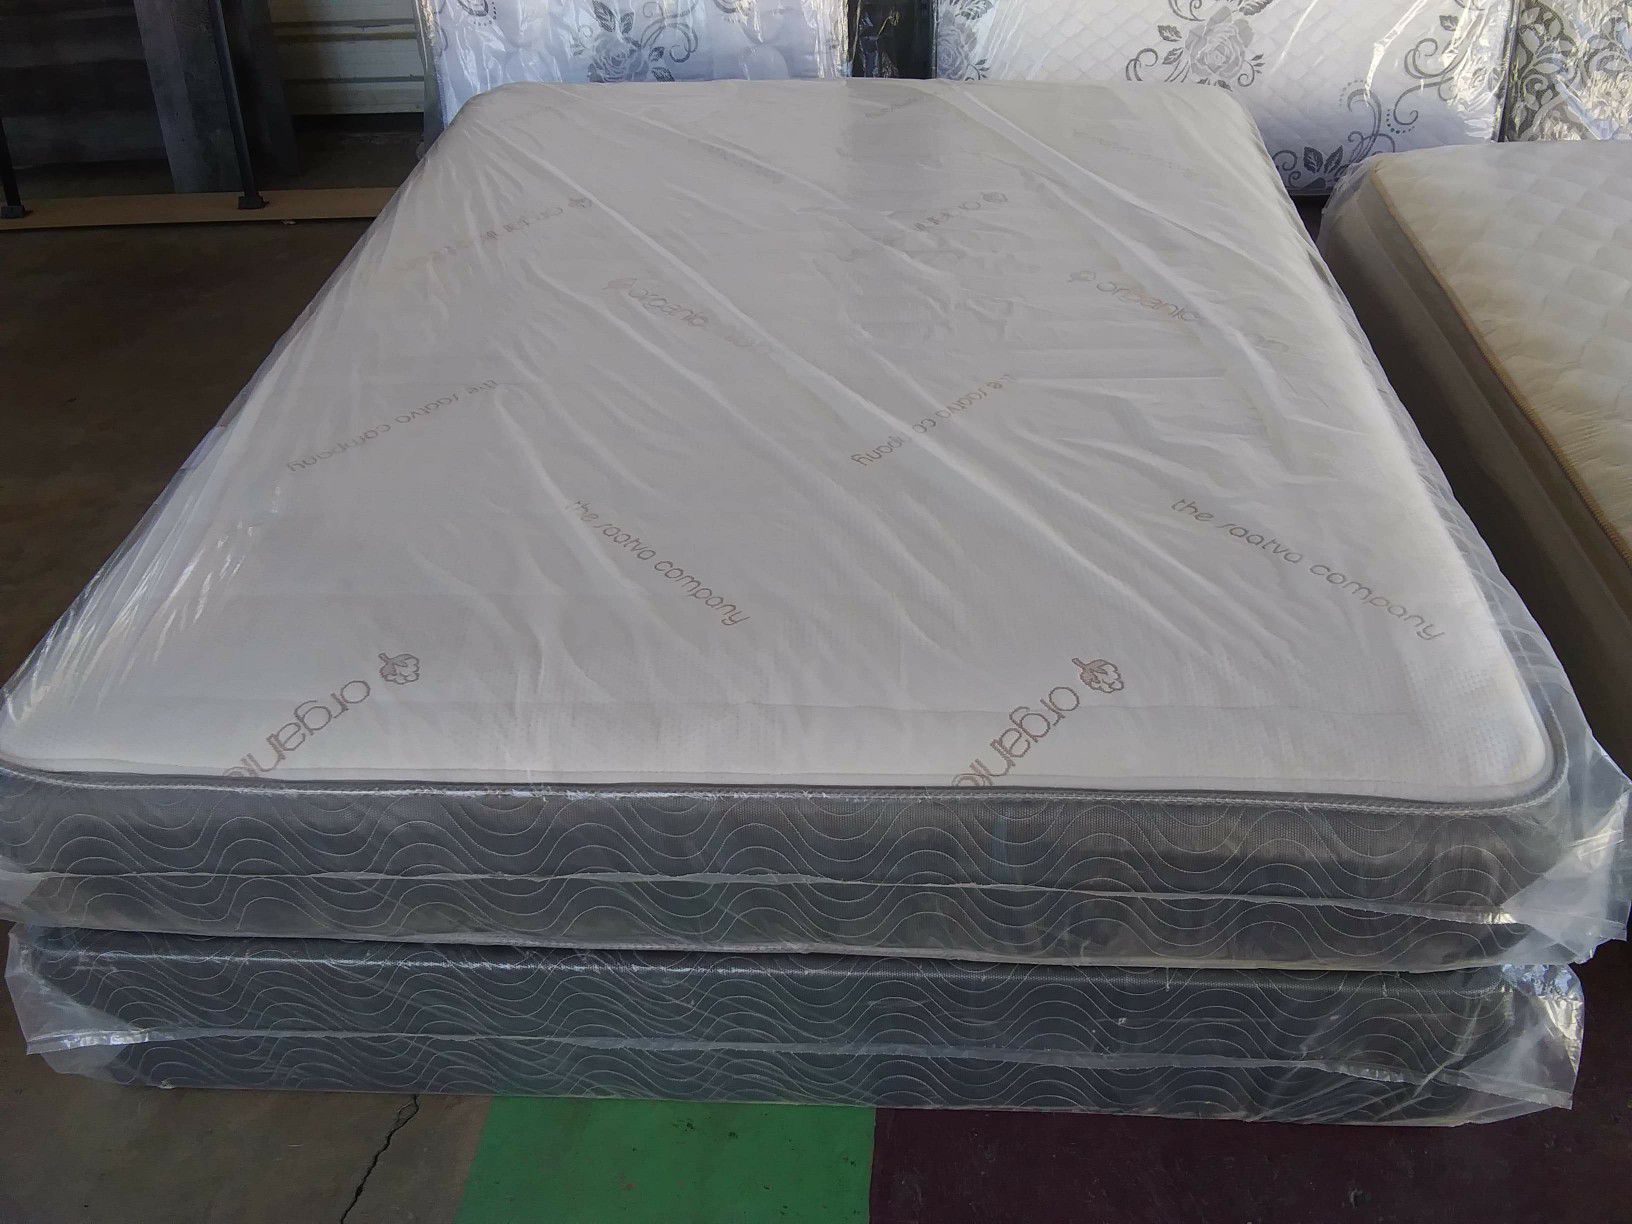 Queen size mattress with box spring